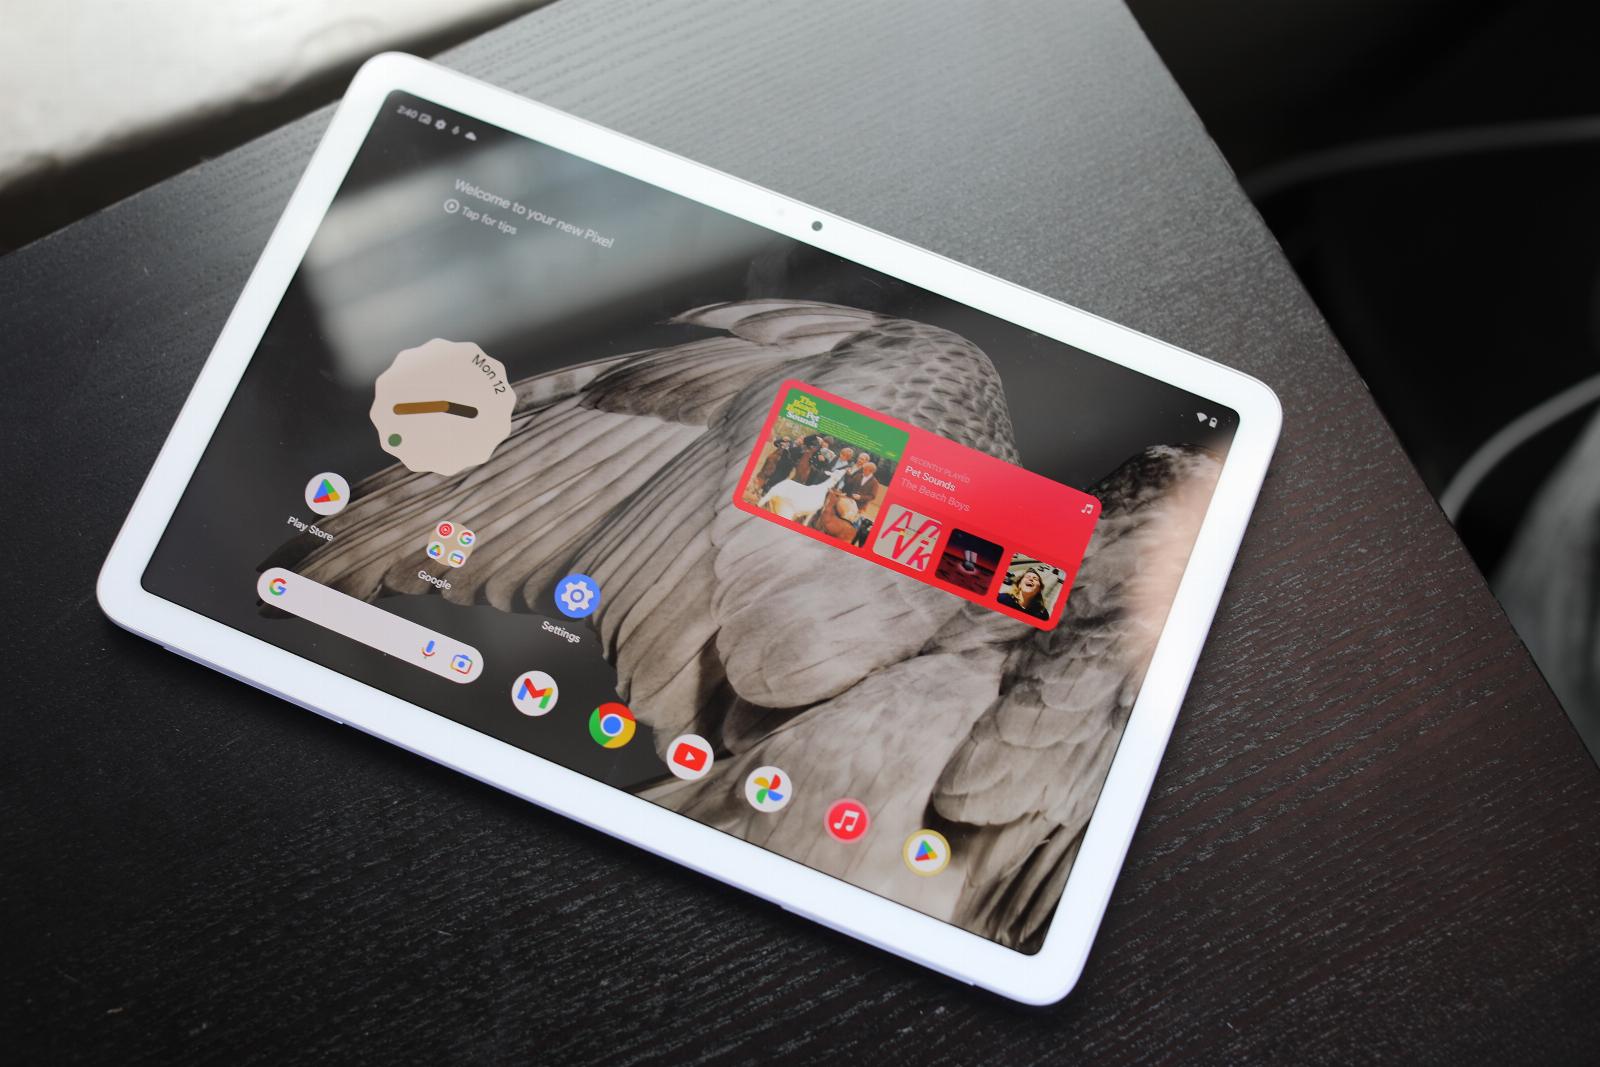 Google’s Pixel Tablet is now available without the thing that makes it interesting